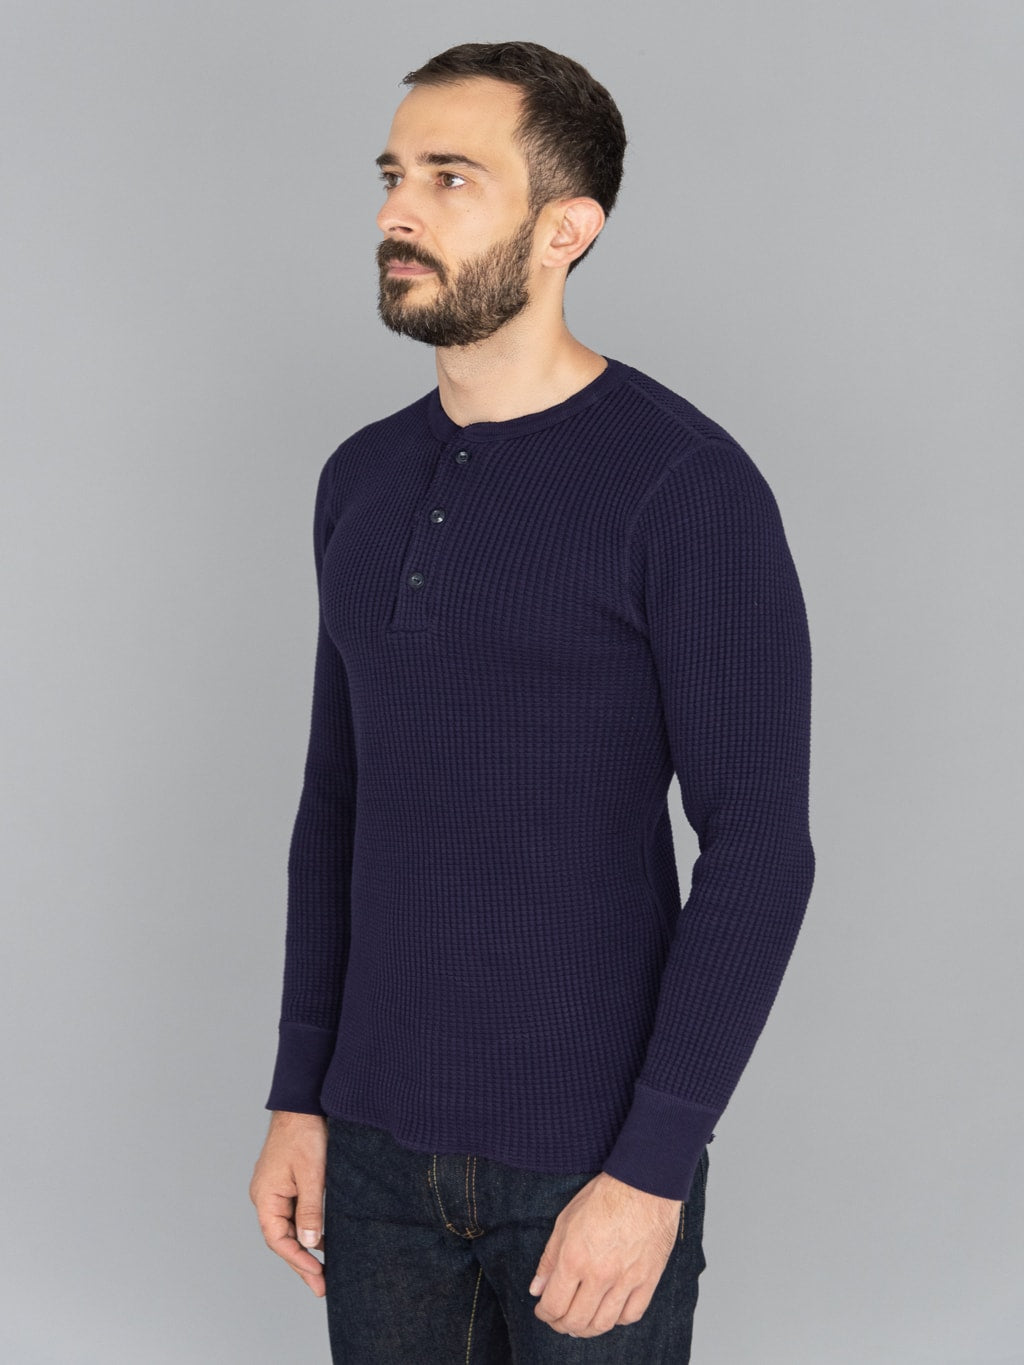 UES Thermal Waffle Long Sleeve Henley Navy model side fit